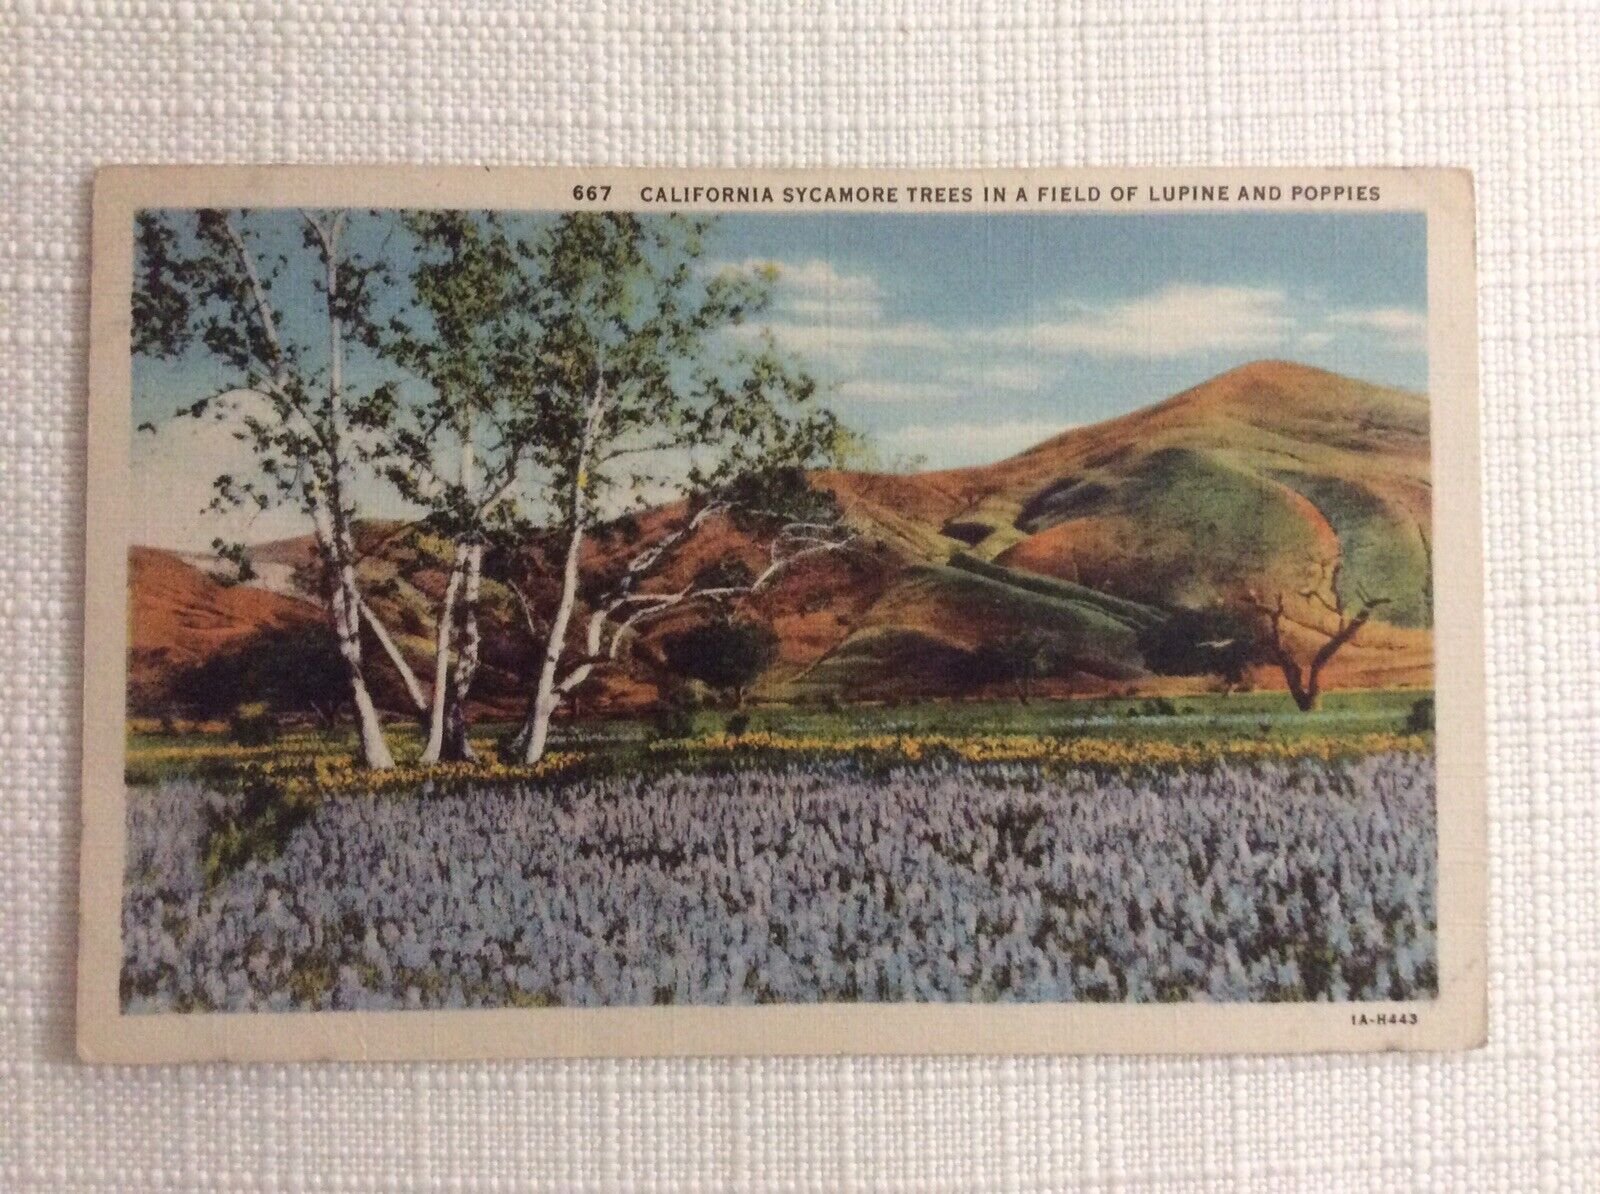 Vintage California Sycamore Trees In A Field Of Lupine and Poppies -667unposted